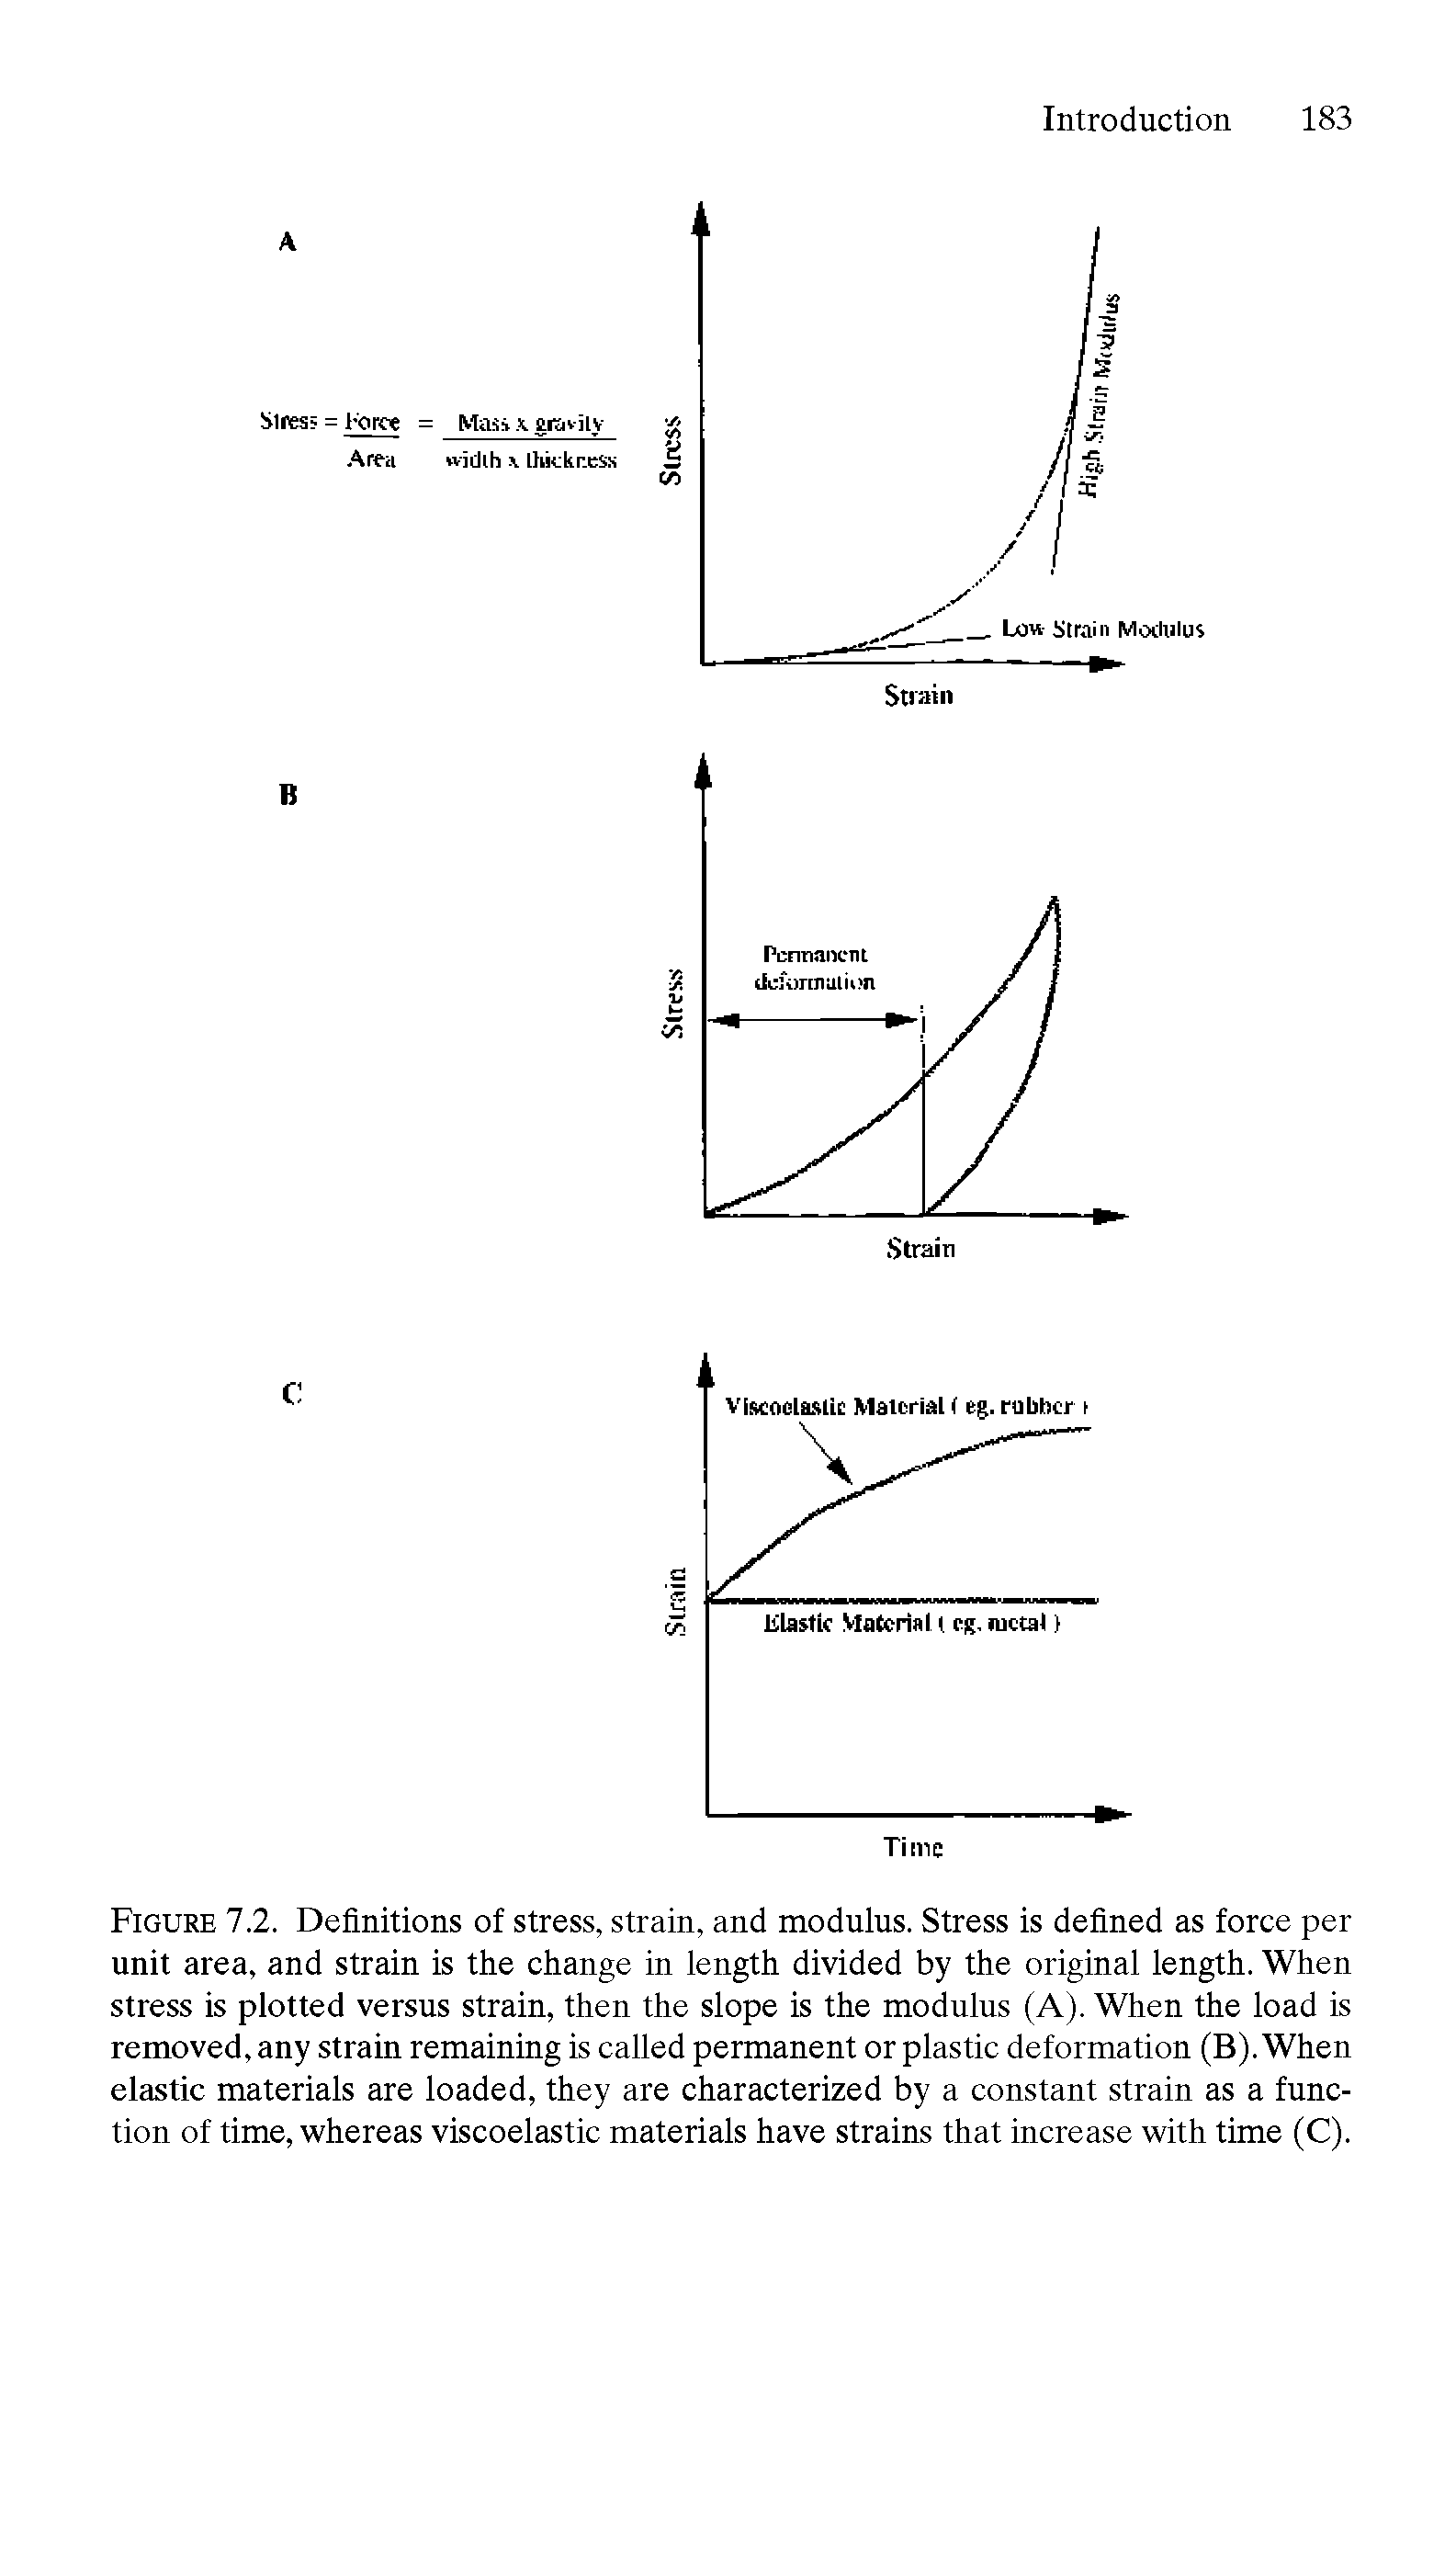 Figure 7.2. Definitions of stress, strain, and modulus. Stress is defined as force per unit area, and strain is the change in length divided by the original length. When stress is plotted versus strain, then the slope is the modulus (A). When the load is removed, any strain remaining is called permanent or plastic deformation (B). When elastic materials are loaded, they are characterized by a constant strain as a function of time, whereas viscoelastic materials have strains that increase with time (C).